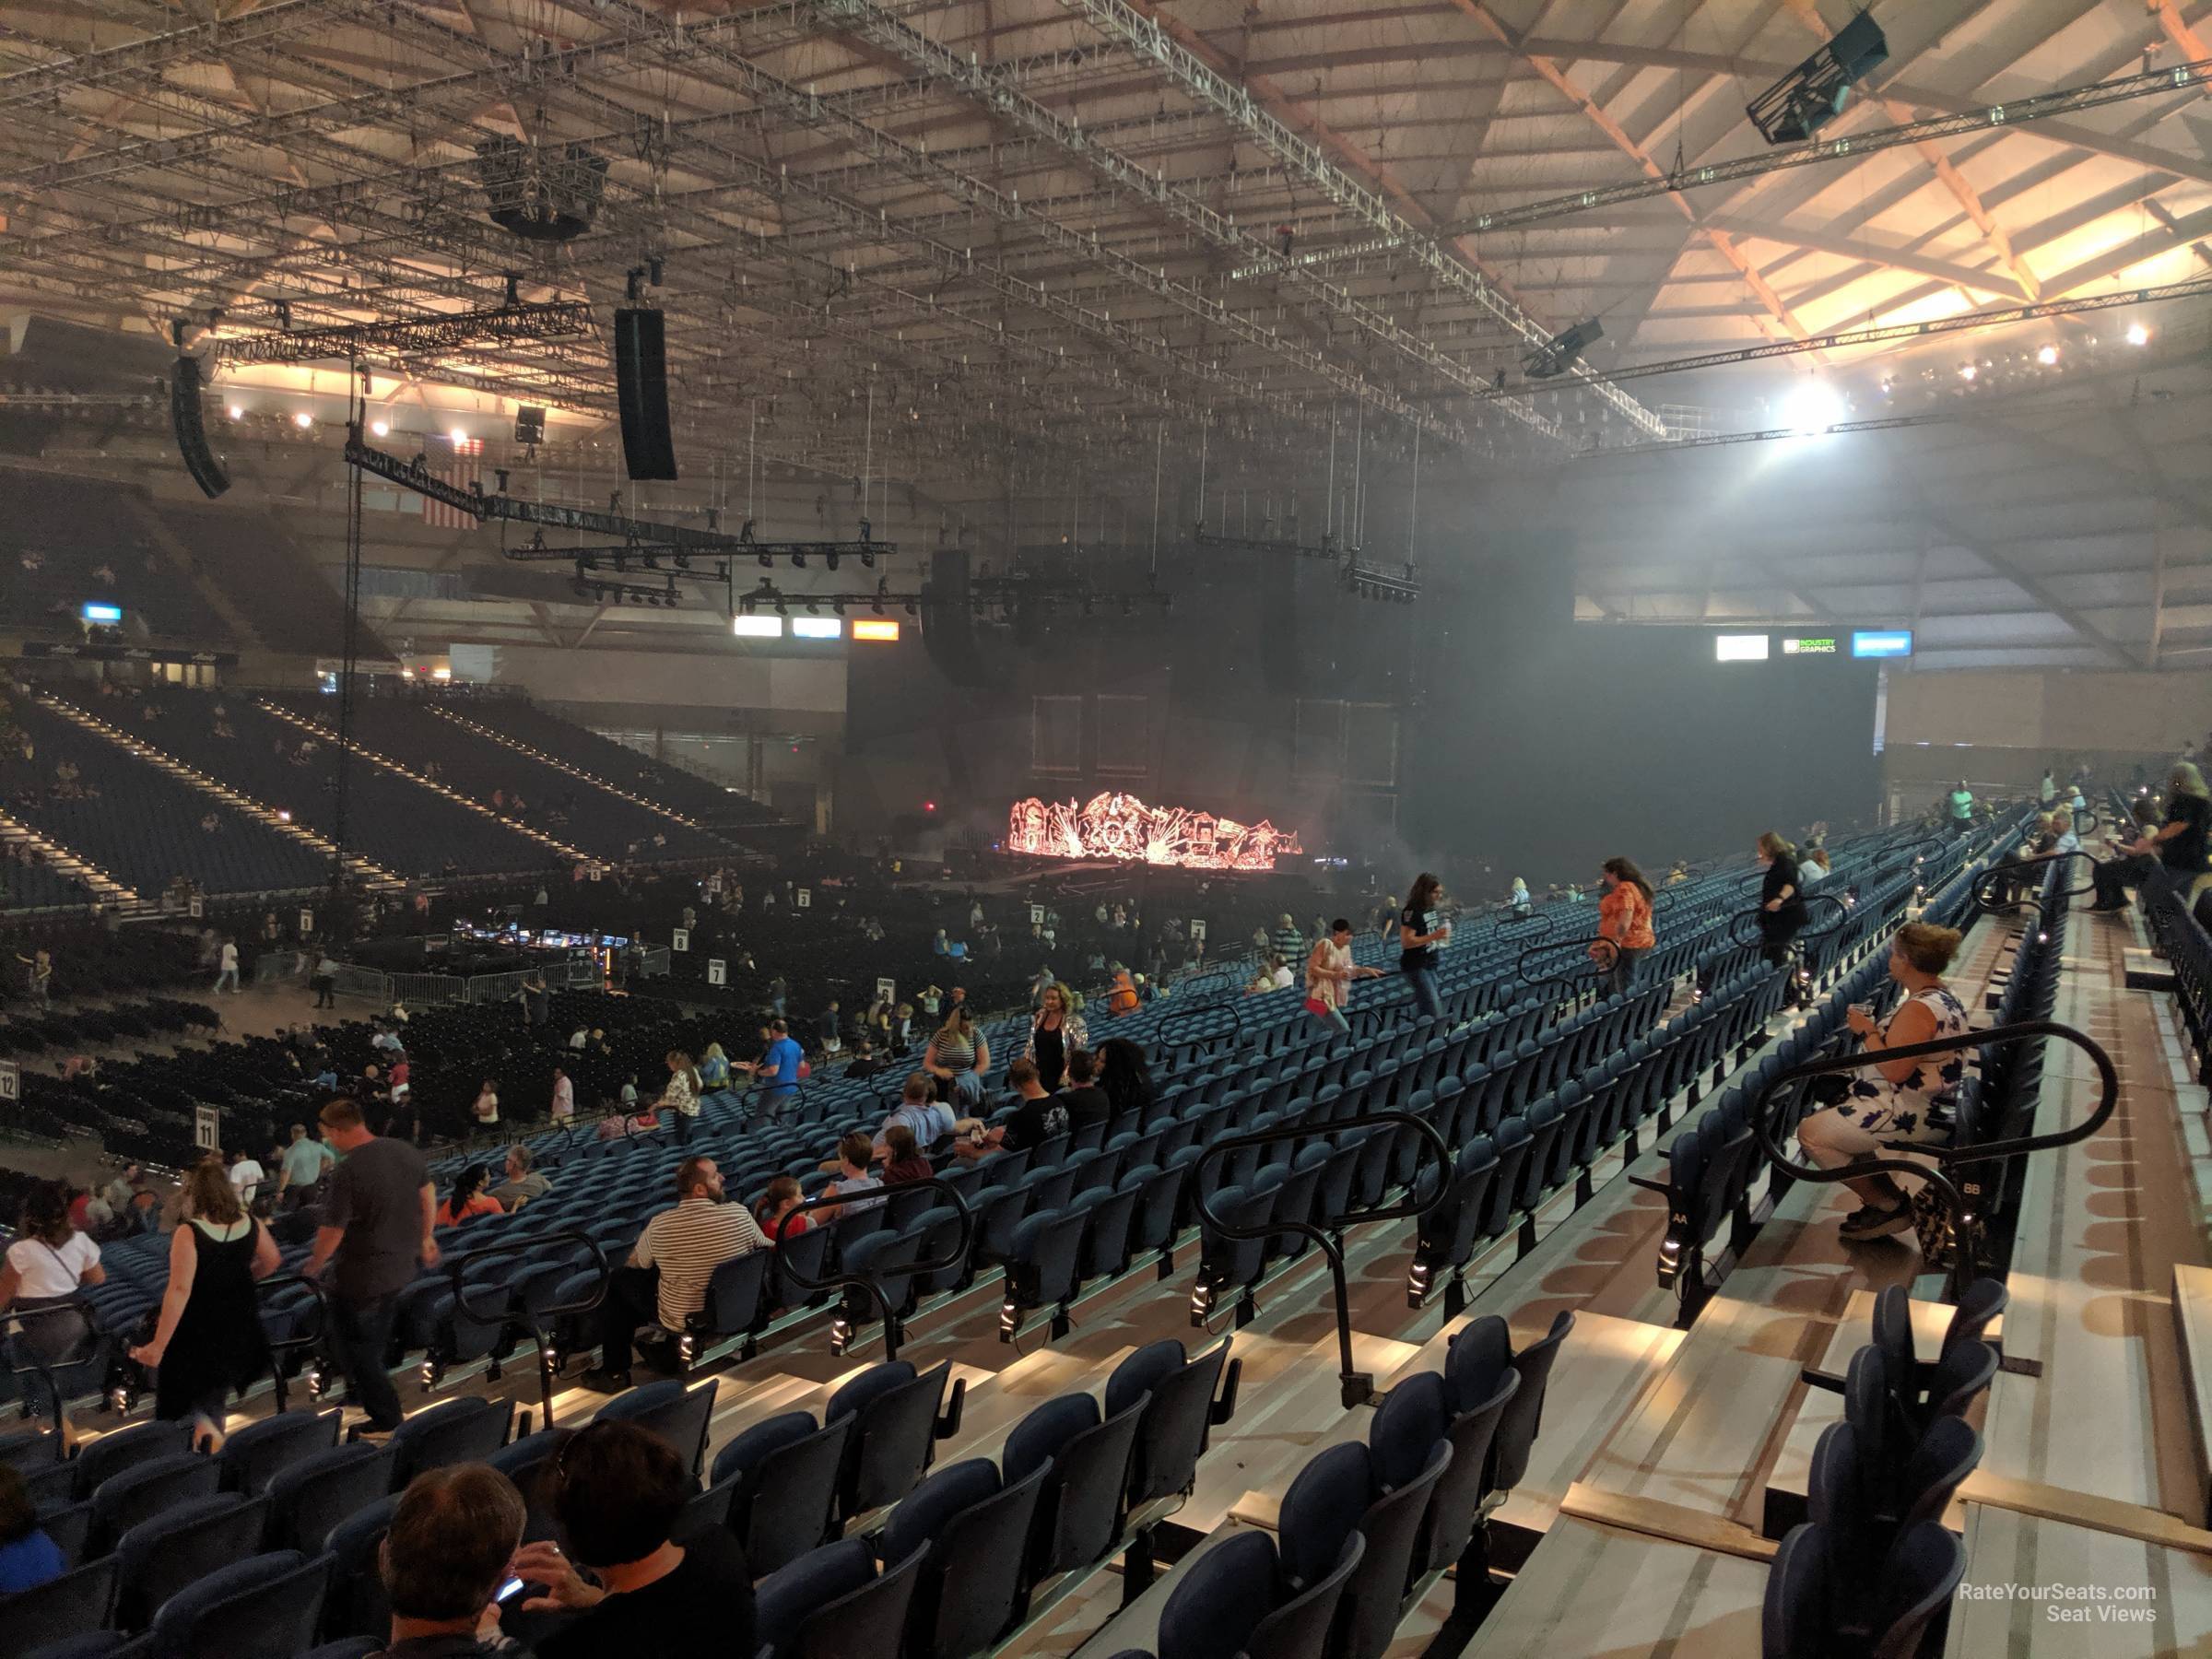 section 114, row cc seat view  - tacoma dome